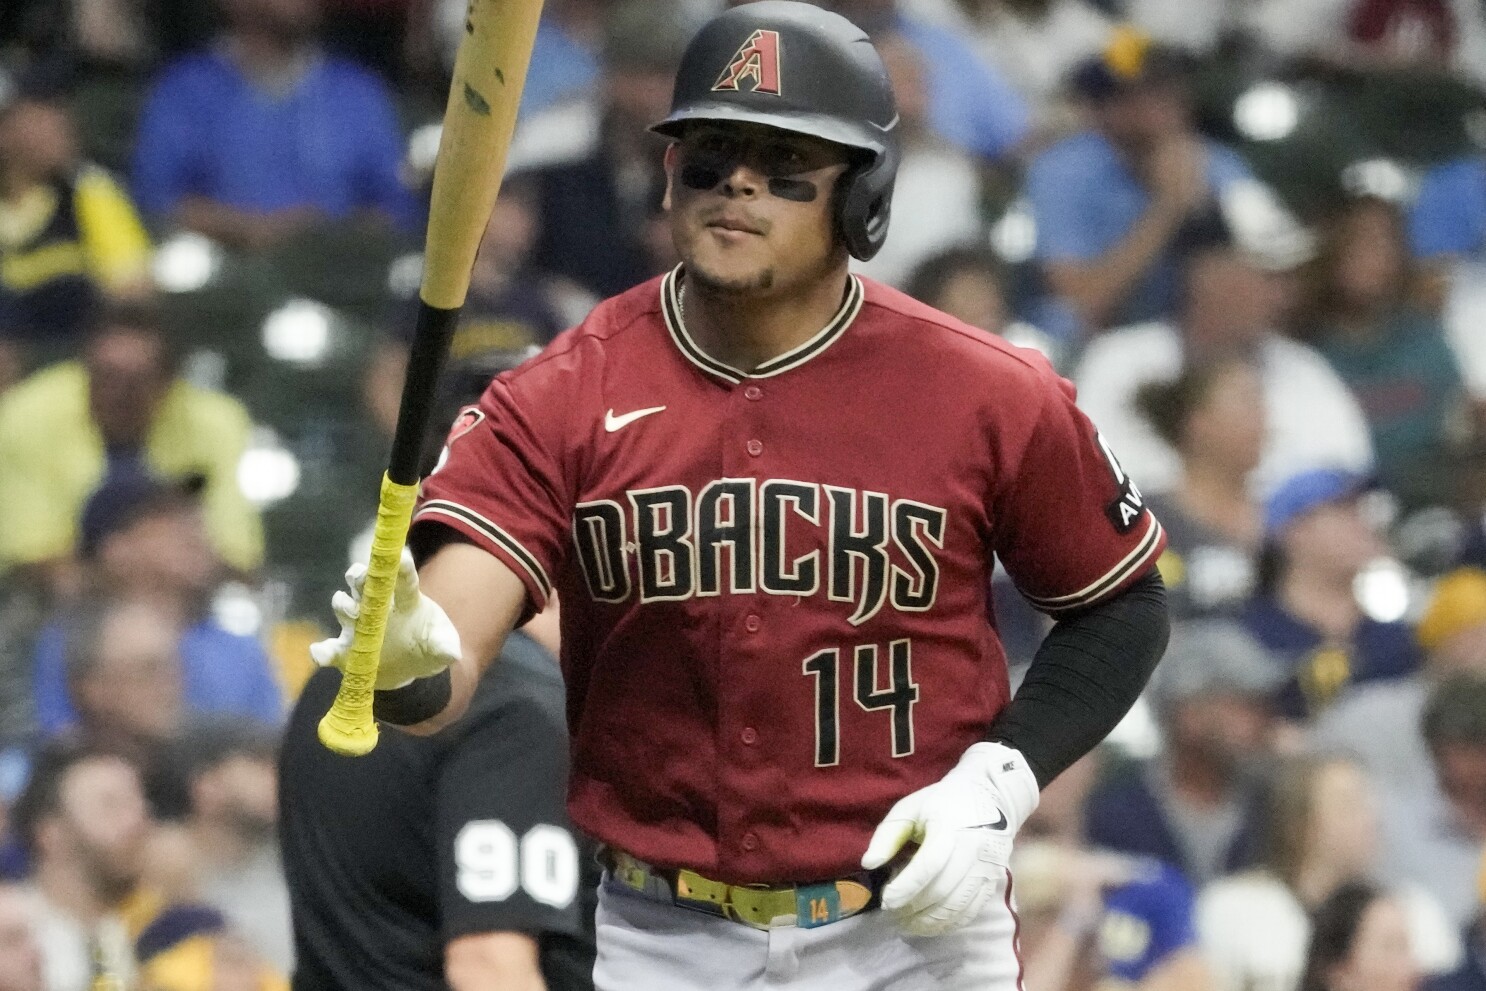 Arizona catcher Gabriel Moreno leaves Game 2 of Wild Card Series after  backswing hits his helmet